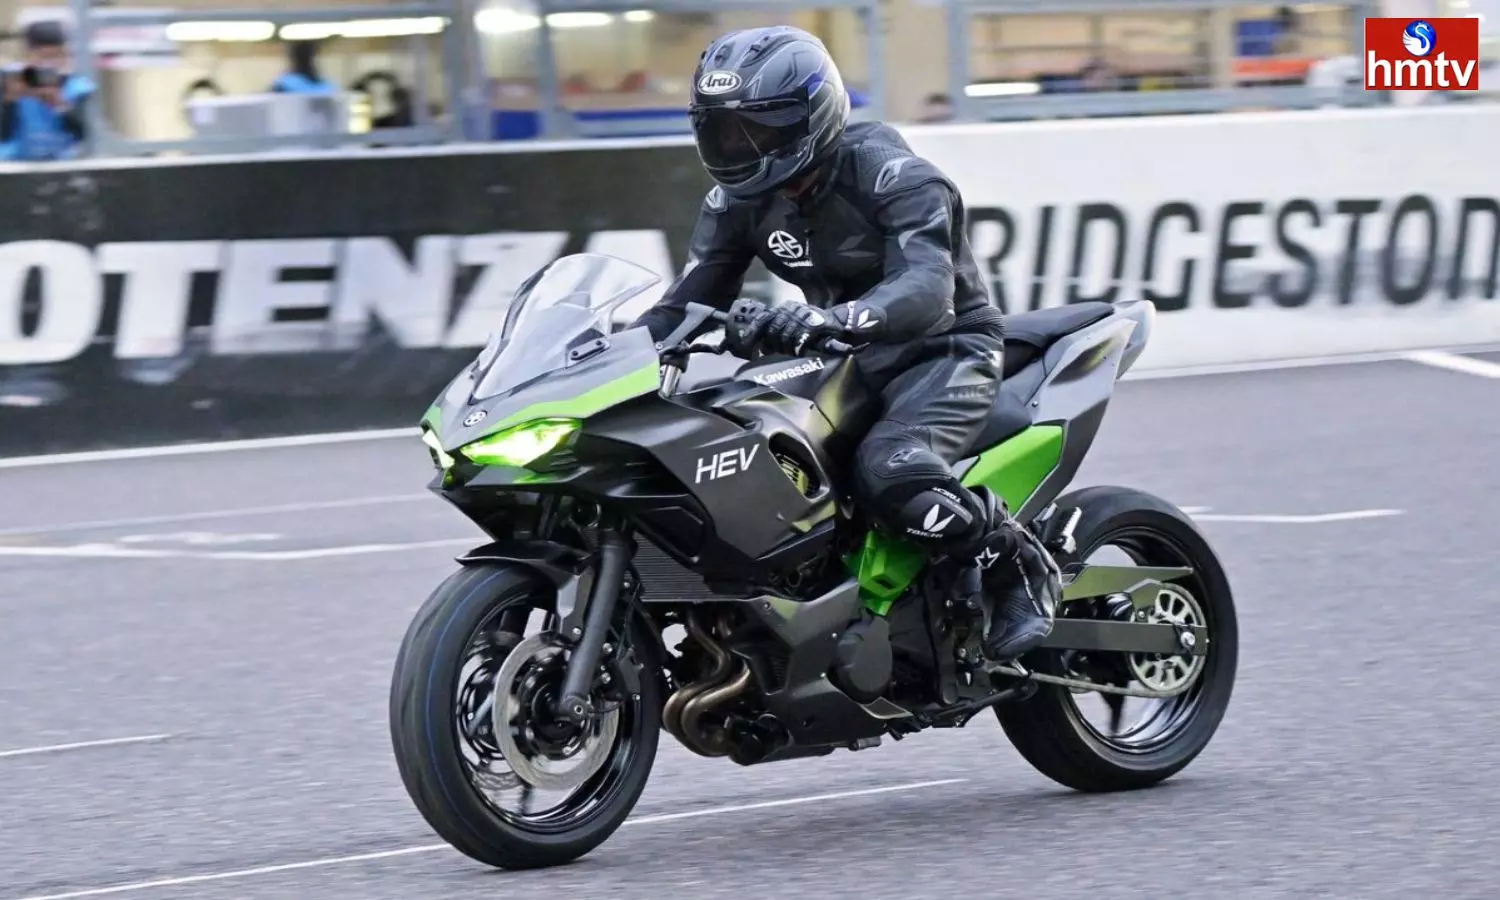 Kawasaki Versys Hybrid Bike Runs With Electric And Petrol Check Specifications And Features Price Details